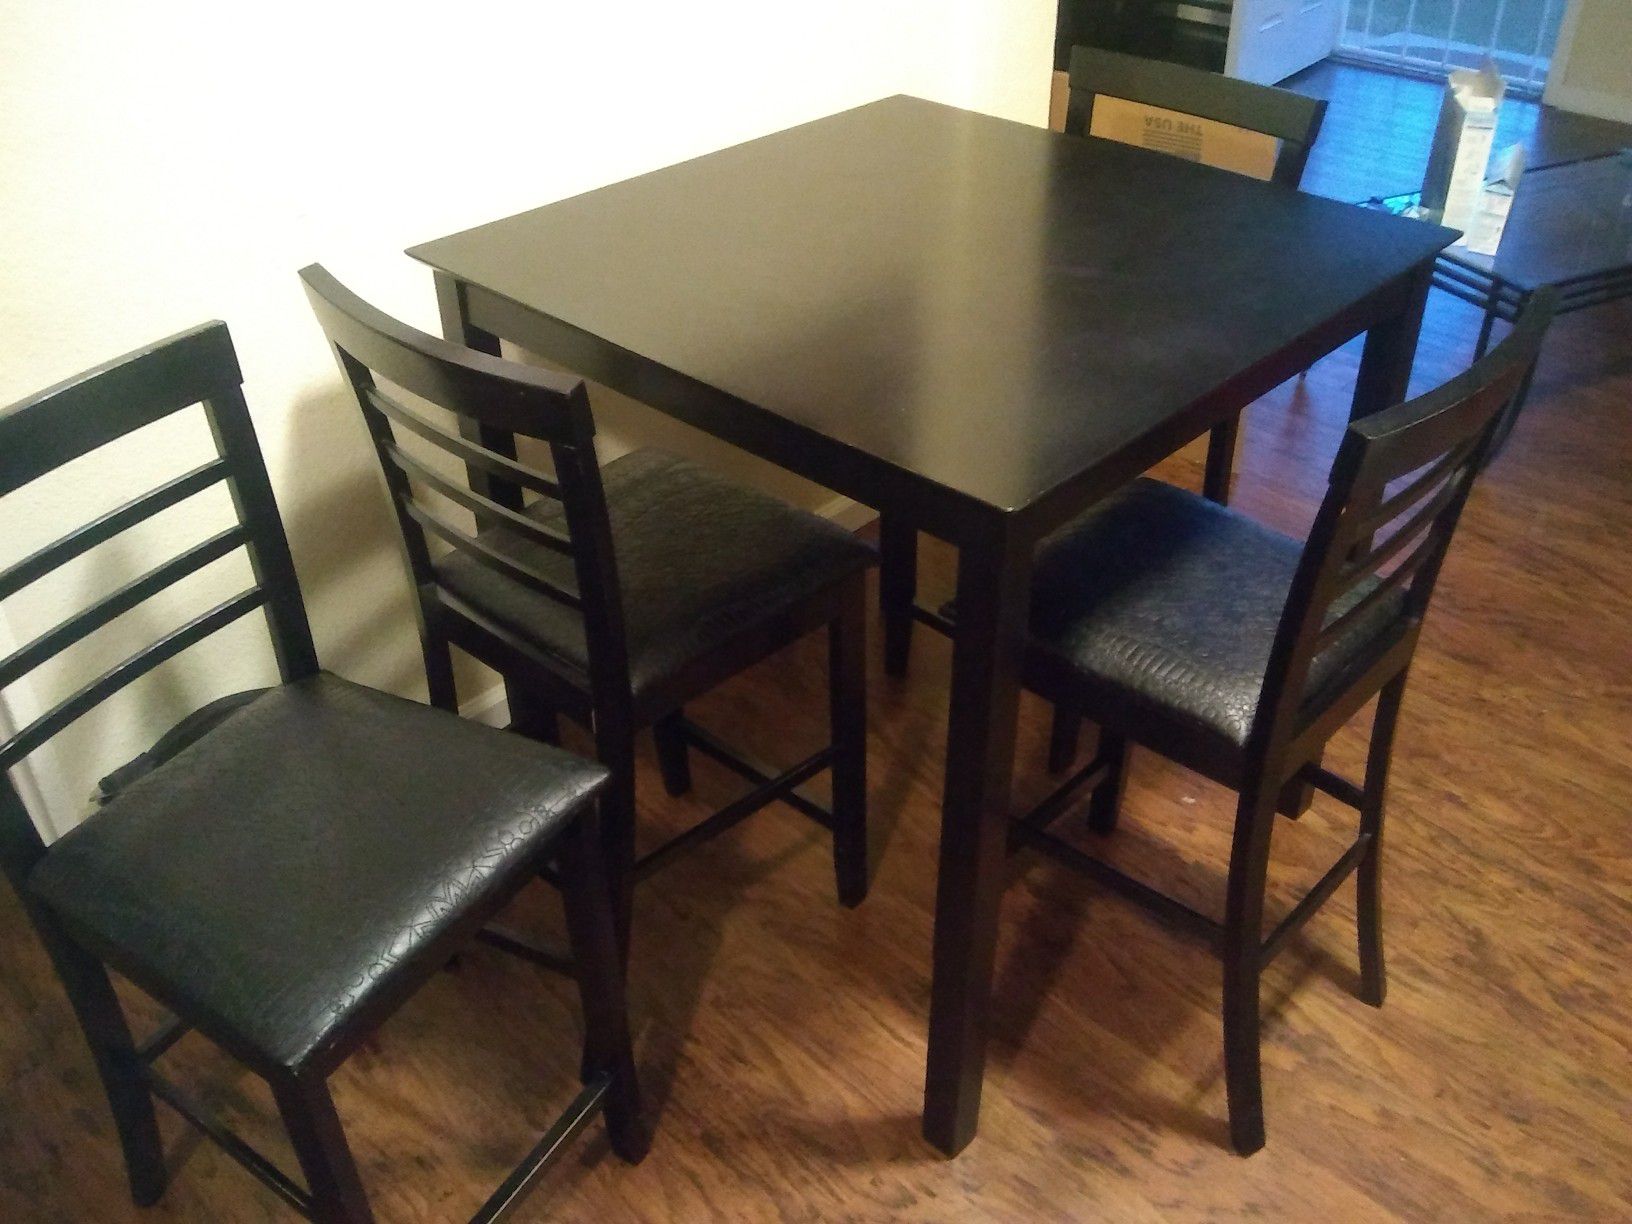 Counter height kitchen table with four chairs